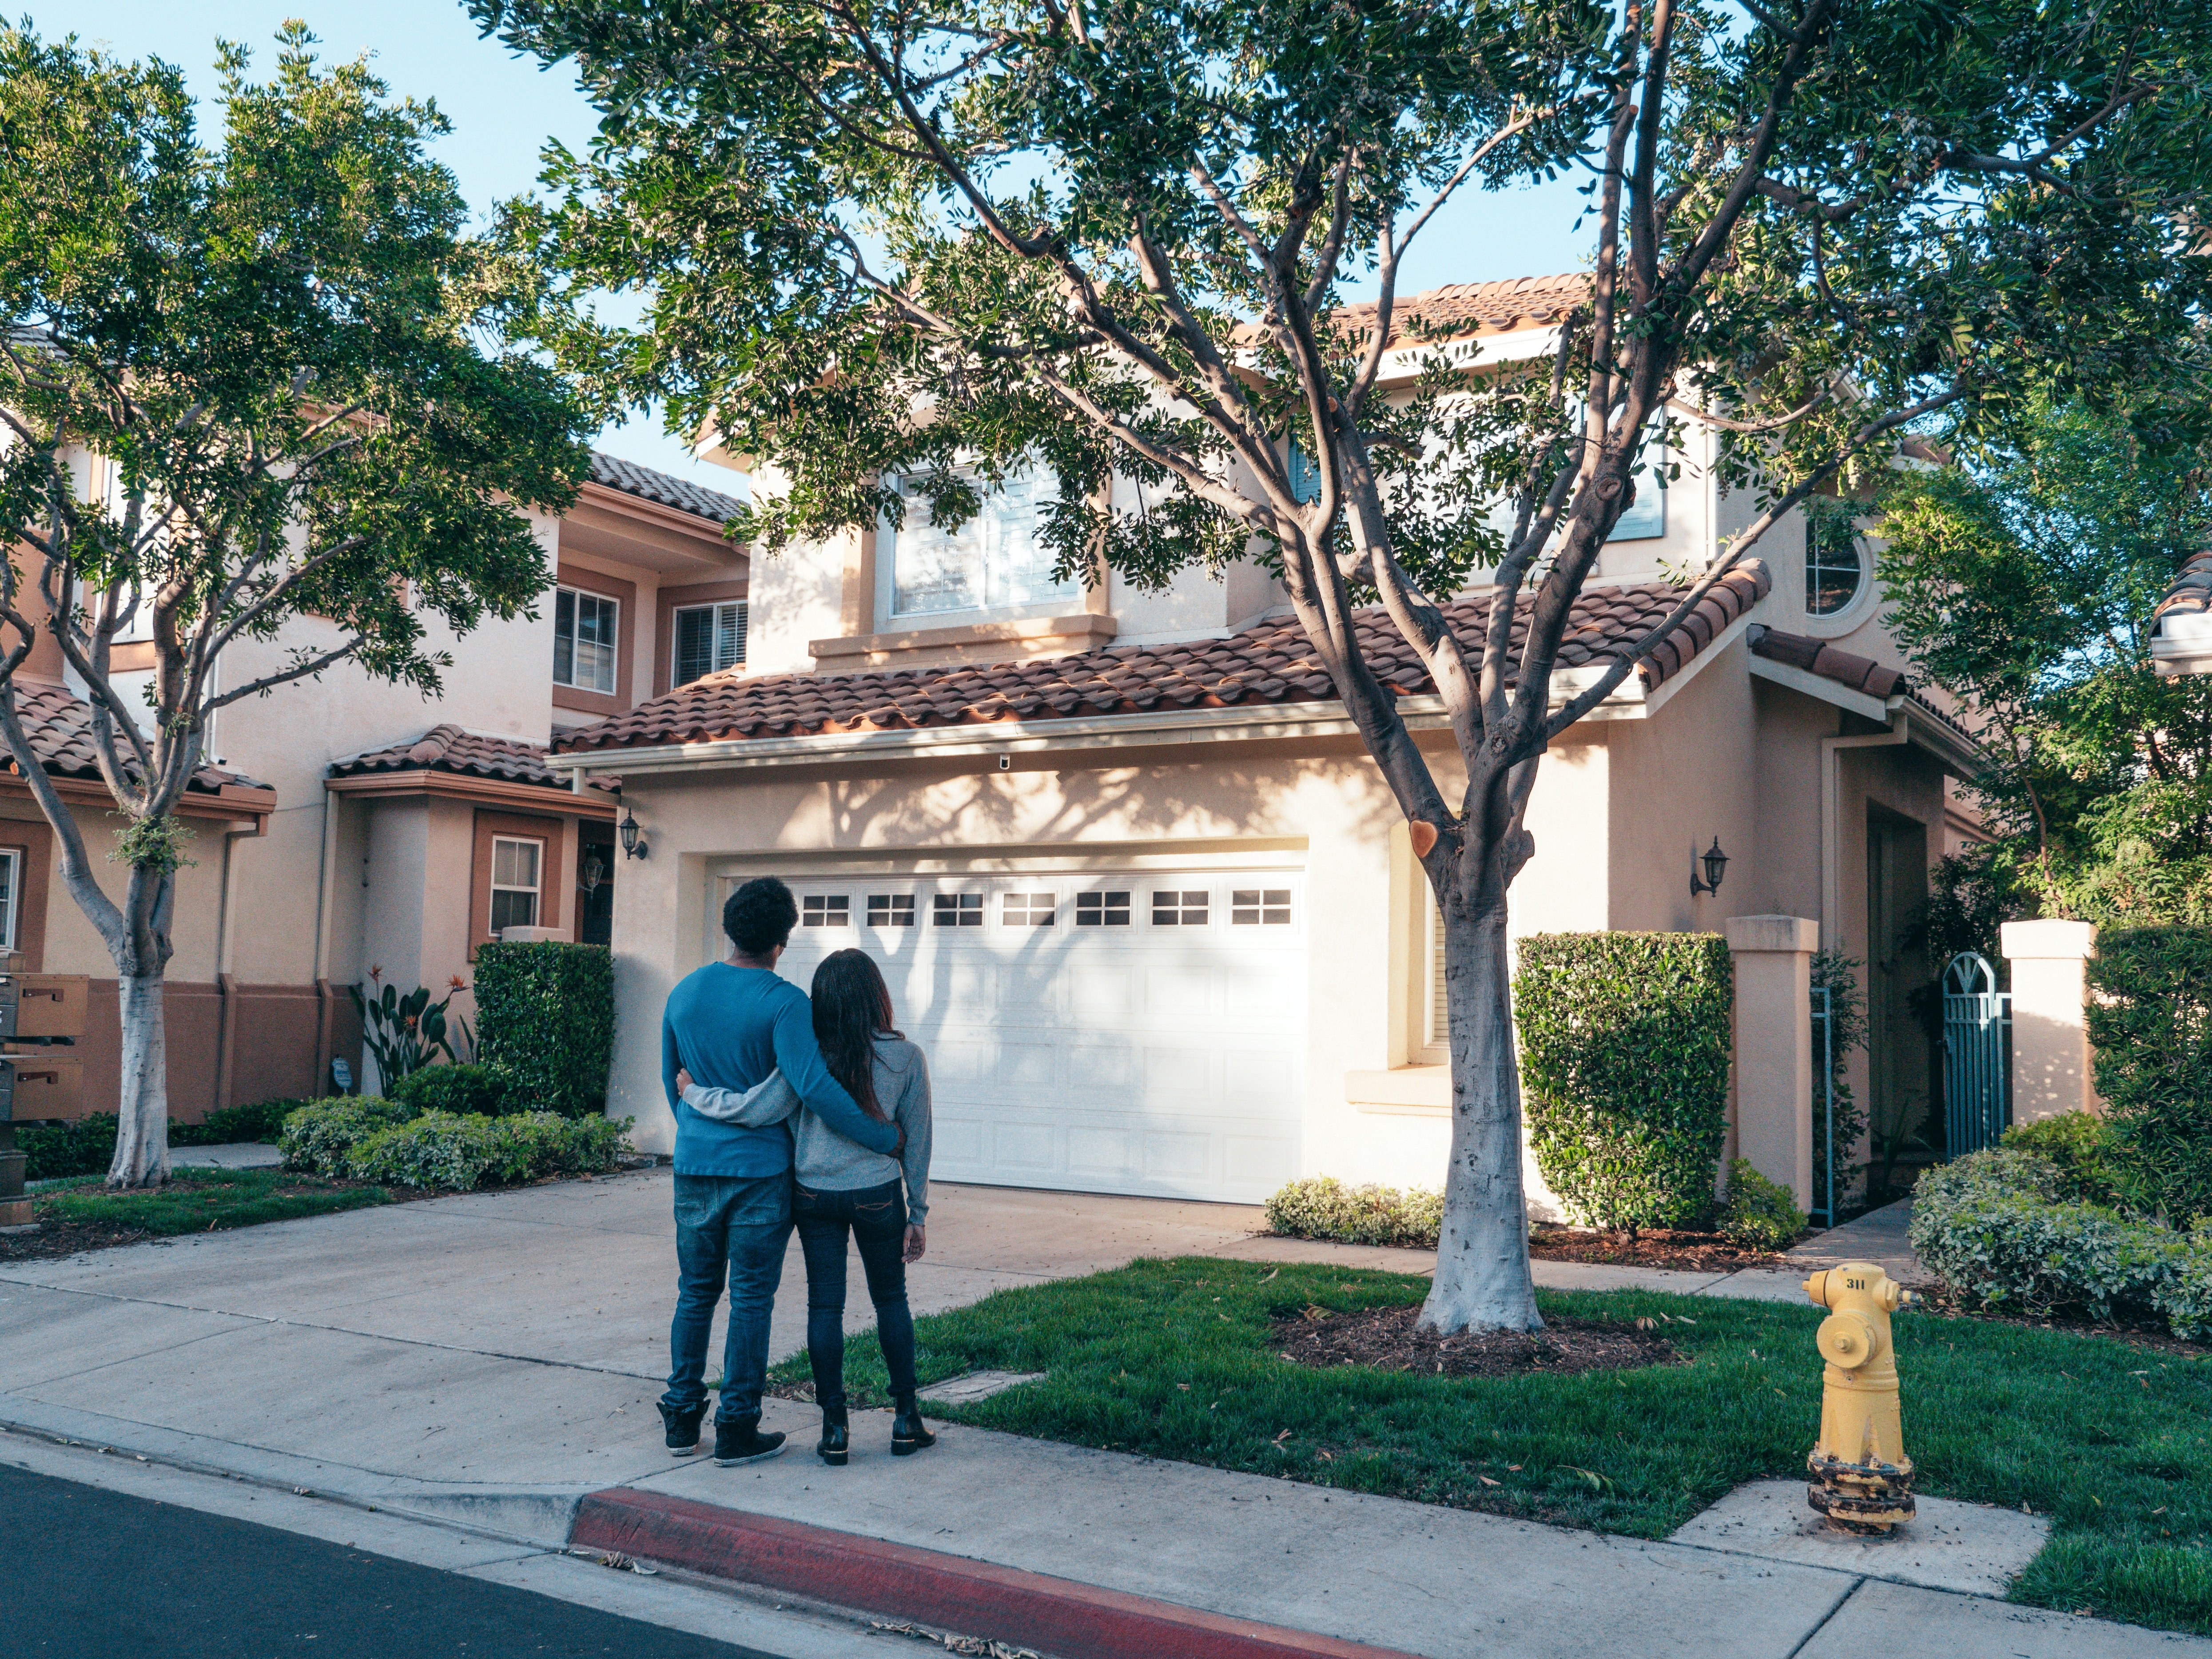 Pictured - A couple standing in front of their house | Source: Pexels